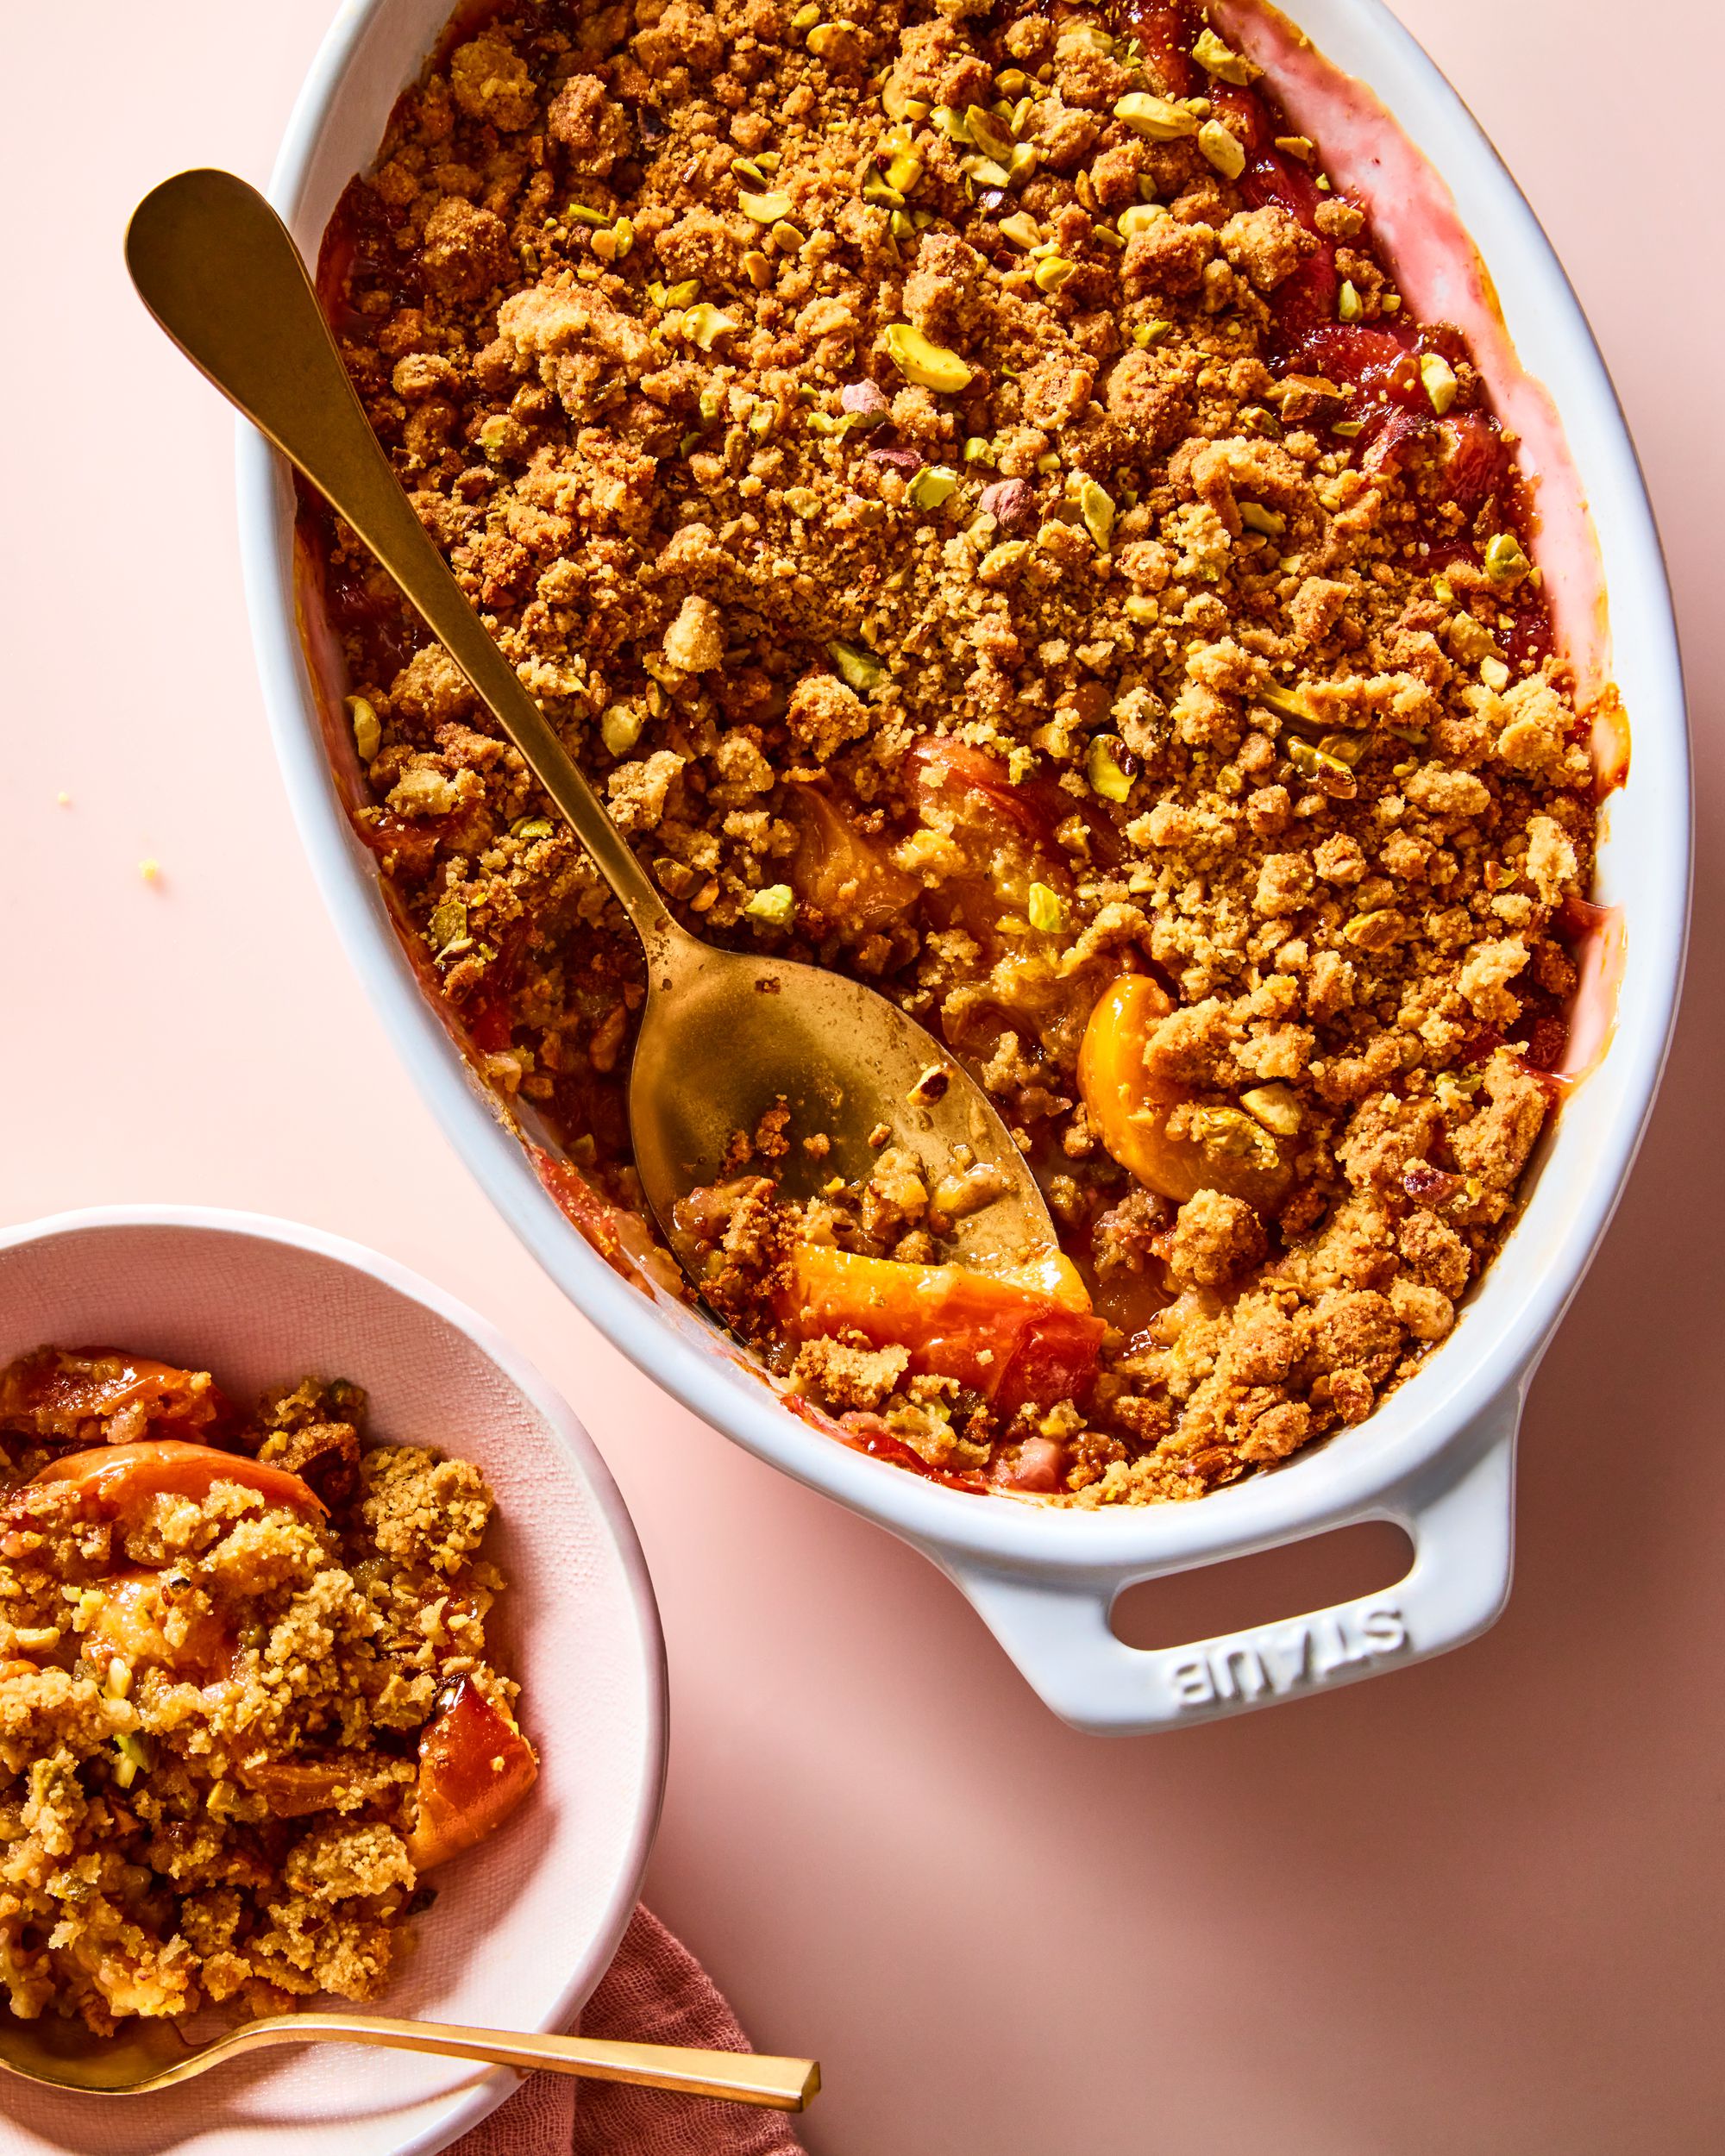 Sohla's Magic Ratio for Turning Any Fruit into a Crumble